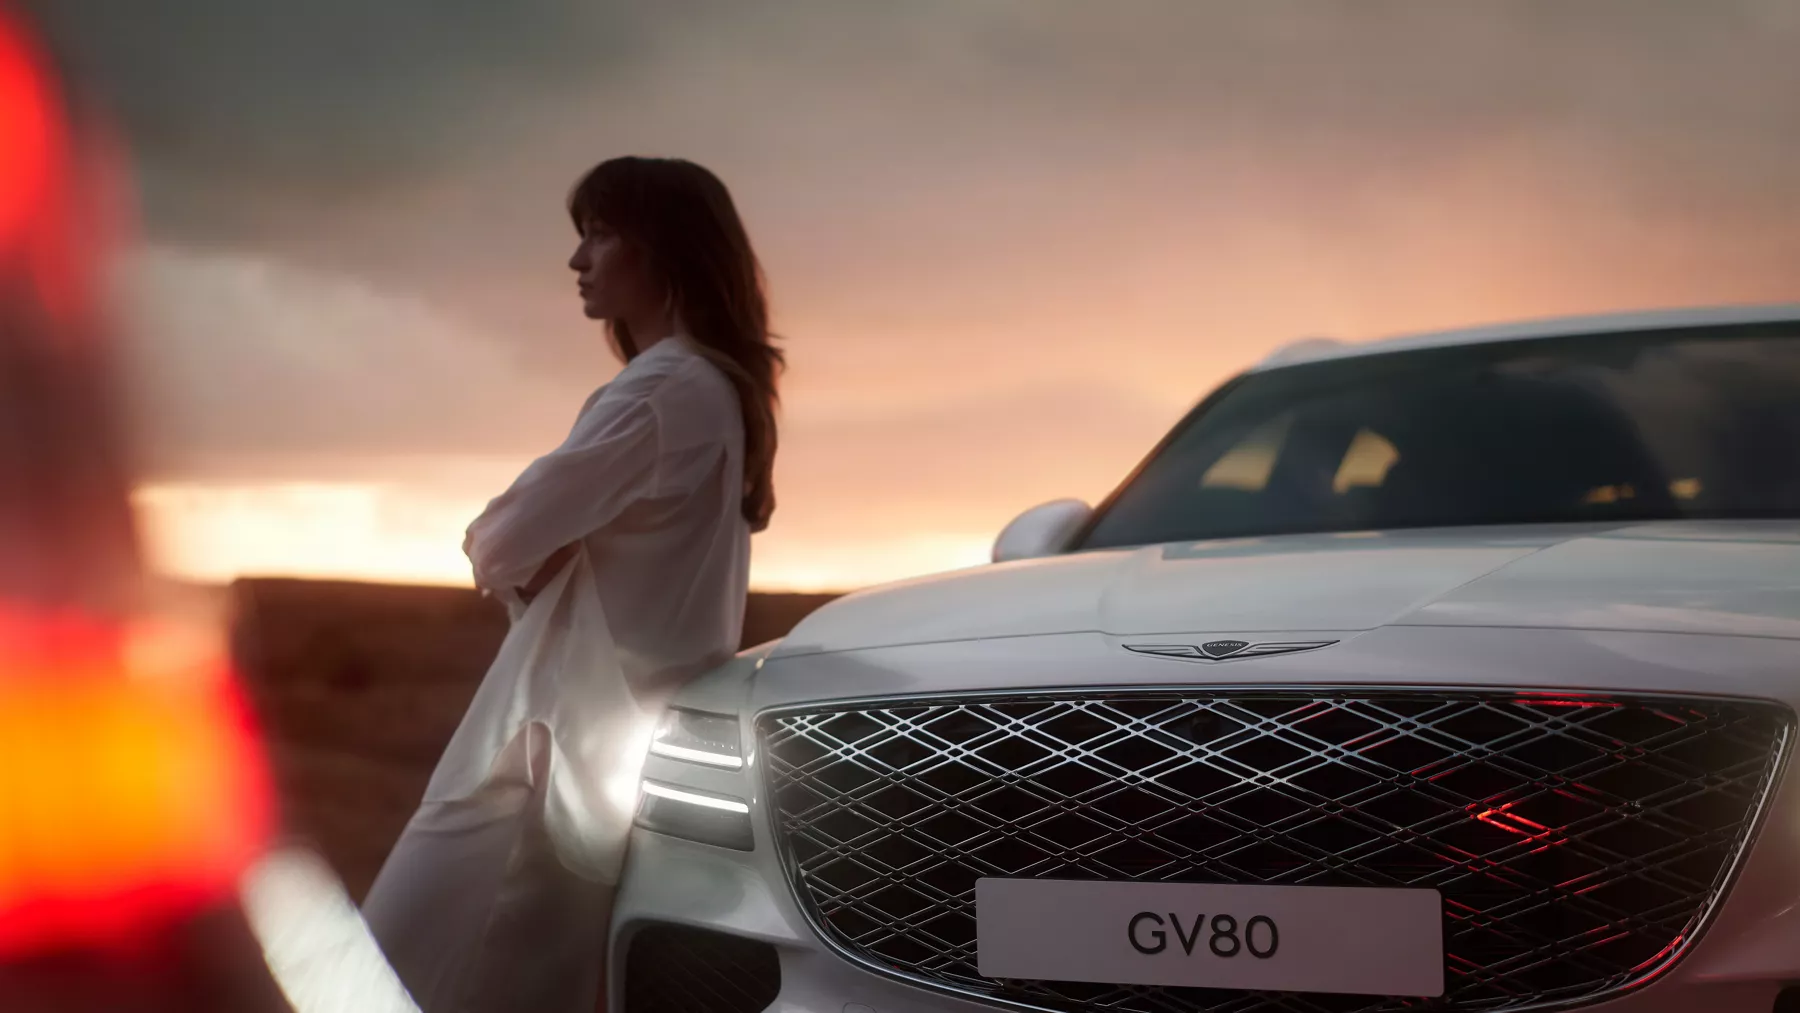 Front grille of GV80 with a woman leaning against the vehicle hood.